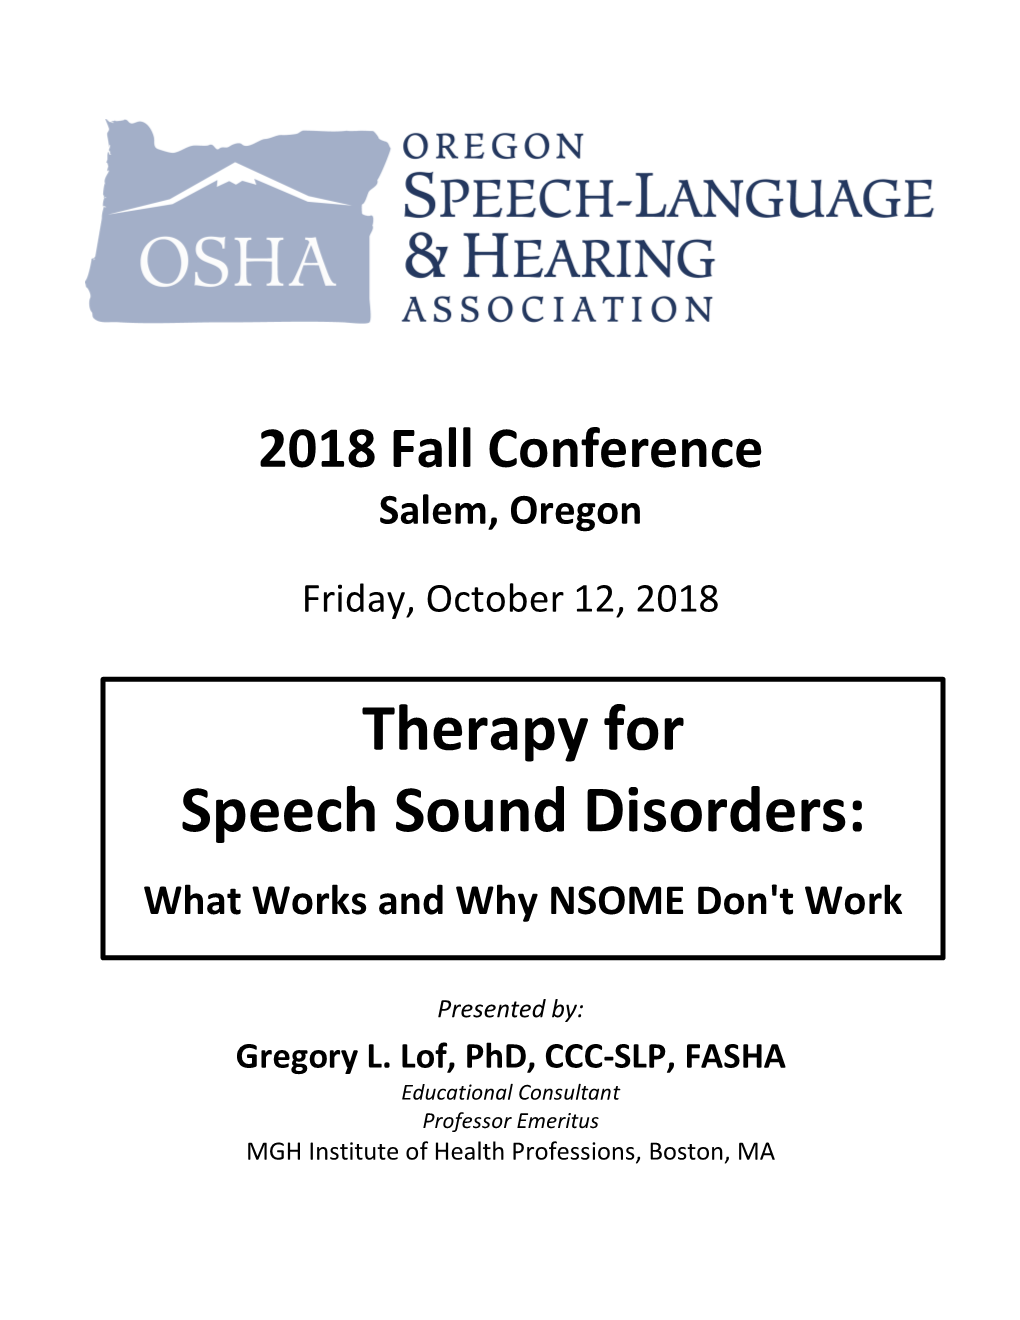 Therapy for Speech Sound Disorders.Pdf